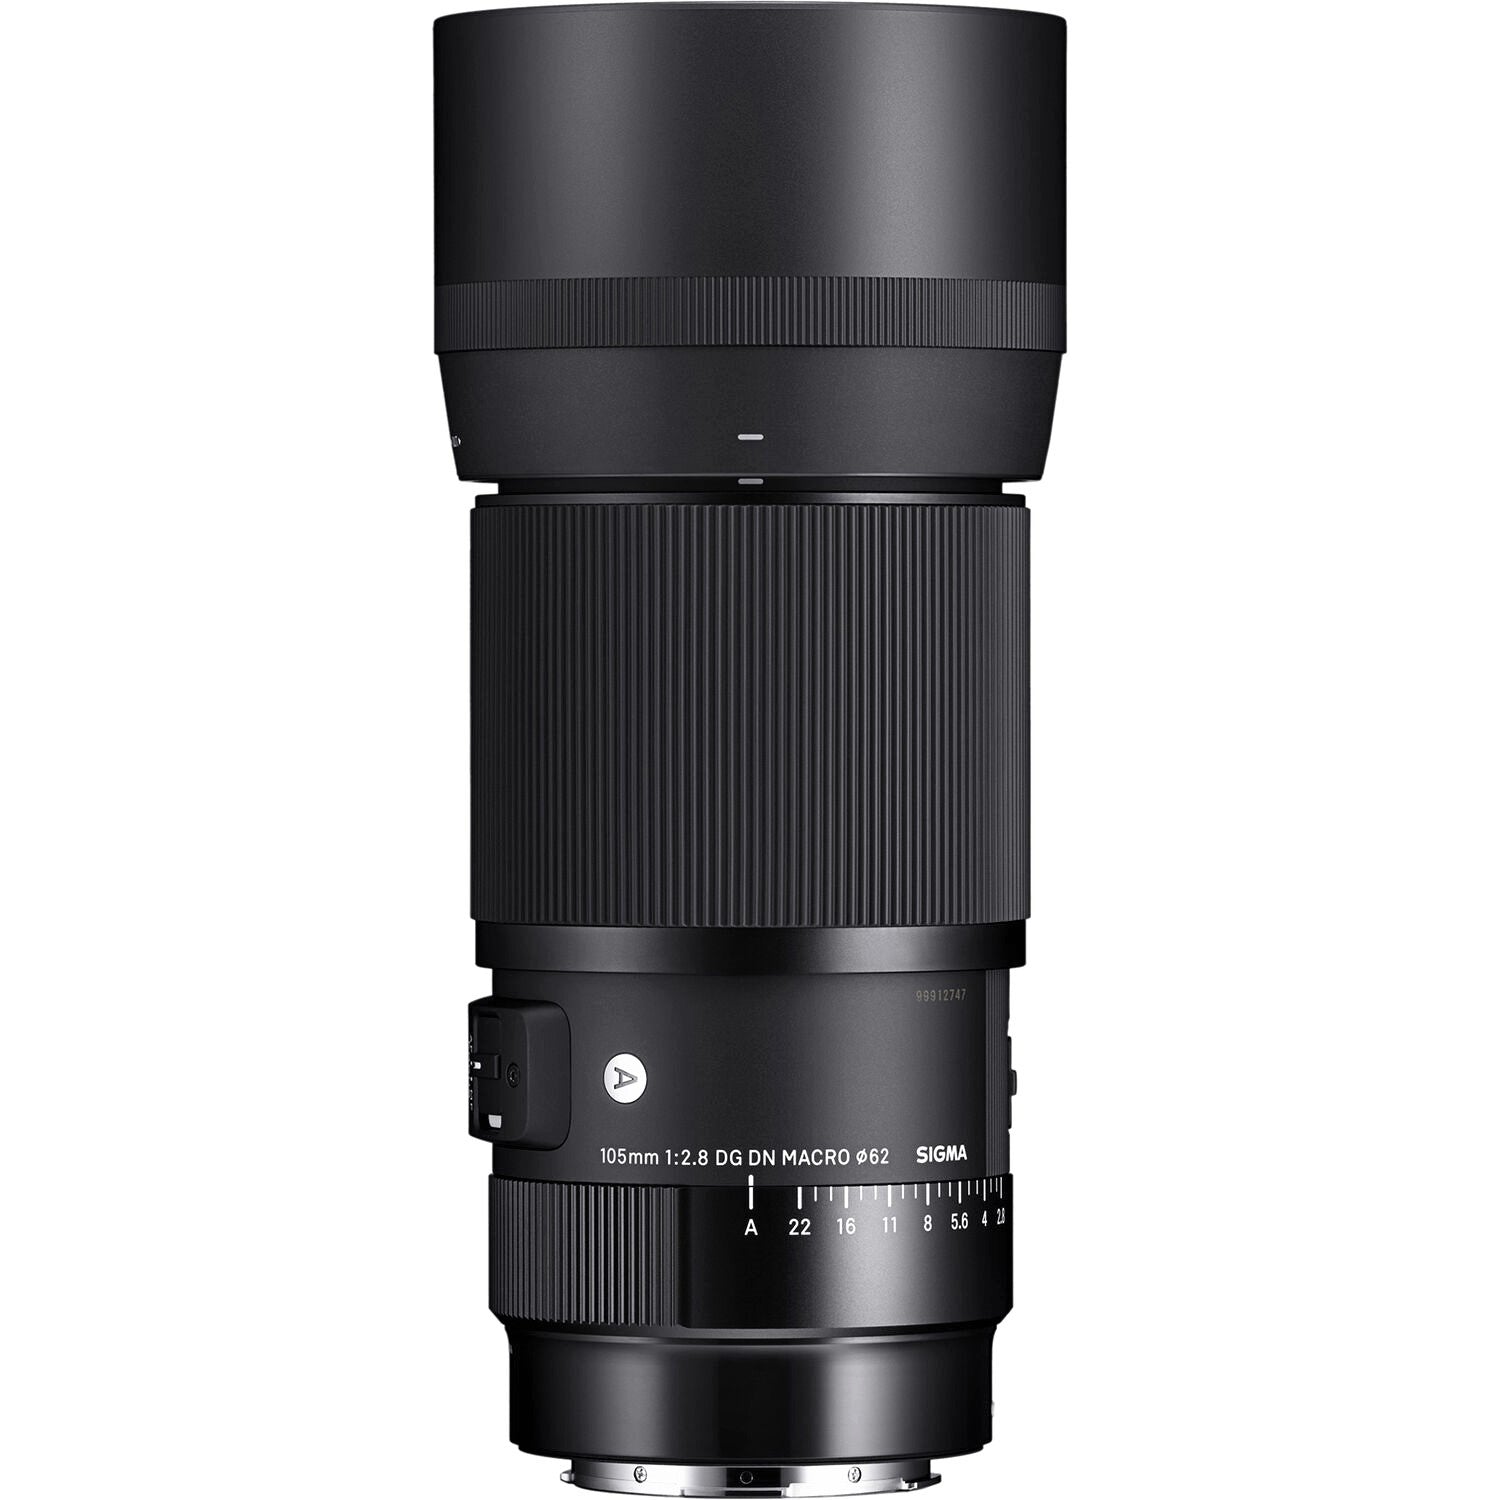 Sigma 105mm F2.8 DG DN Macro Art Lens for Leica L with Attached Lens Hood on the Top